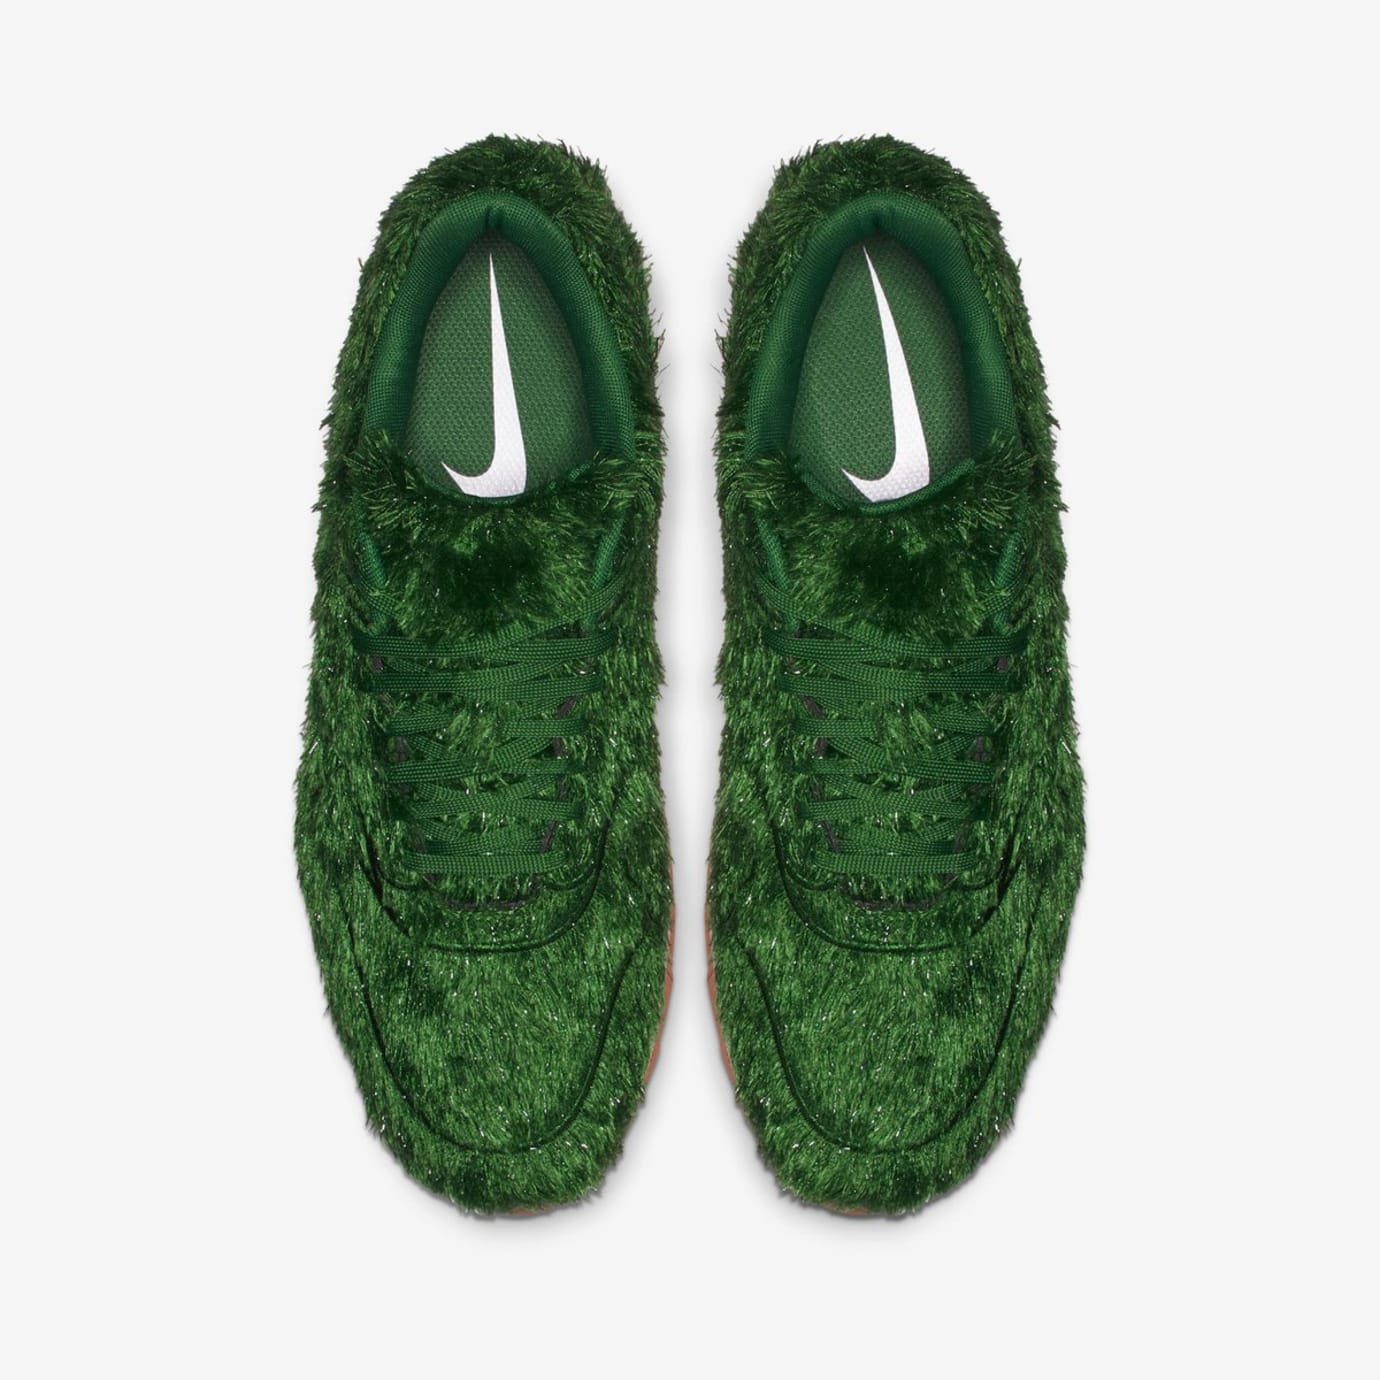 grass shoes nike